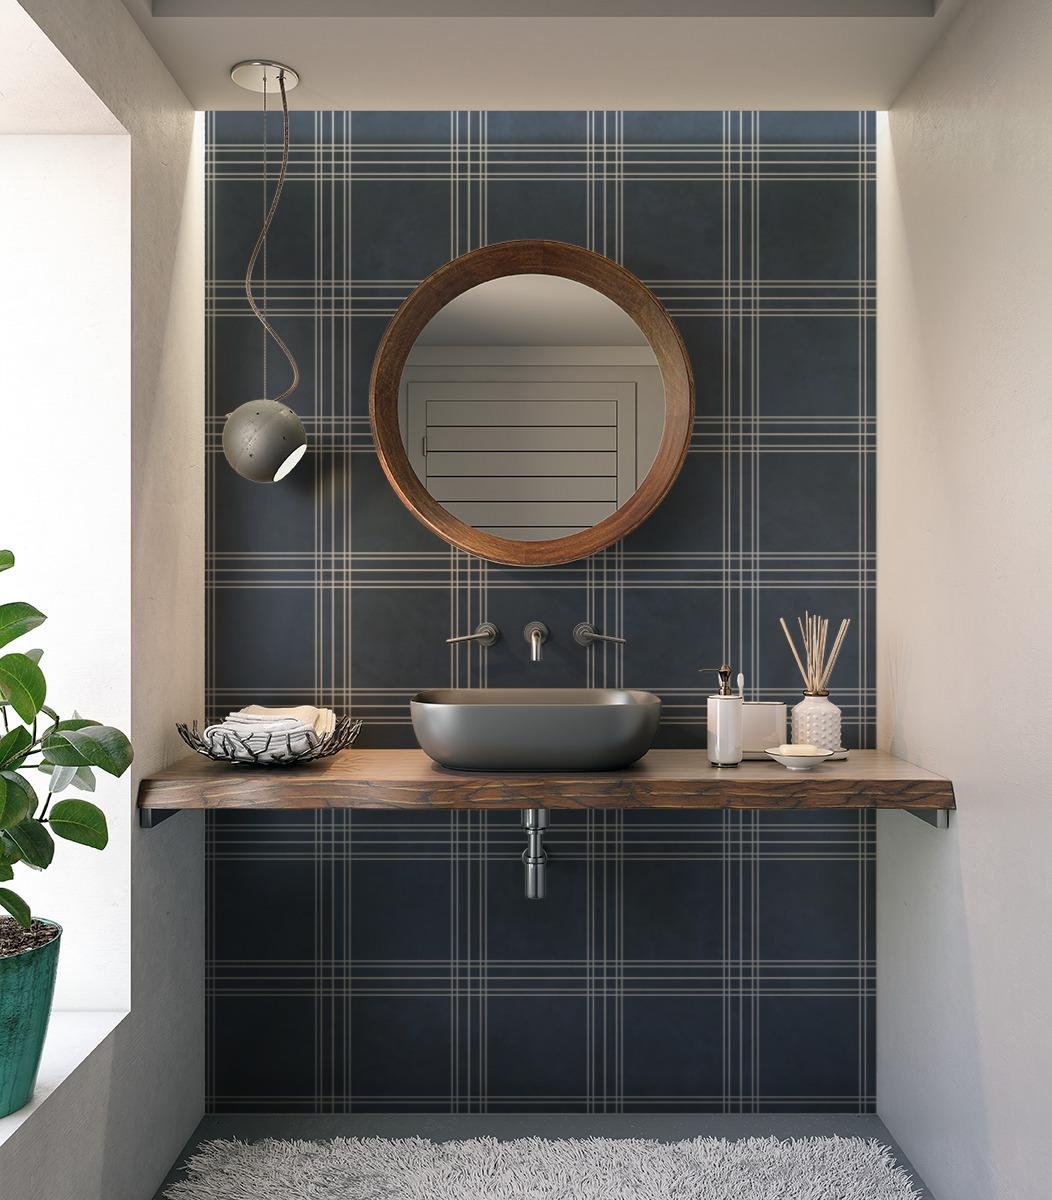 Hollis Plaid, Pattern A, Petite Scale, Ink, Warm Gray Grout